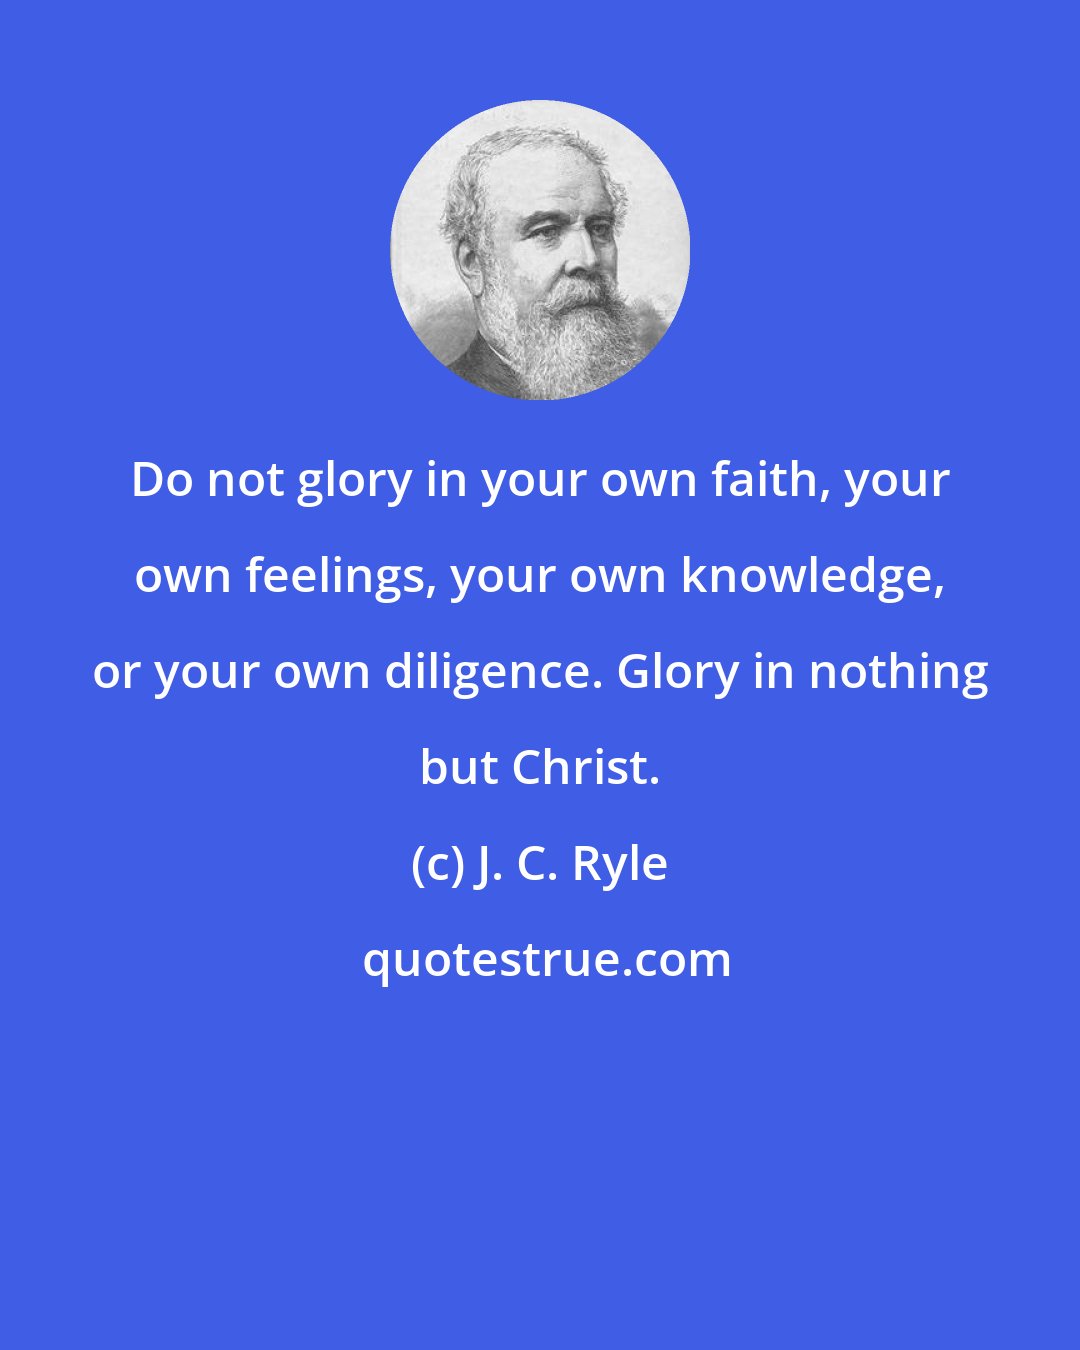 J. C. Ryle: Do not glory in your own faith, your own feelings, your own knowledge, or your own diligence. Glory in nothing but Christ.